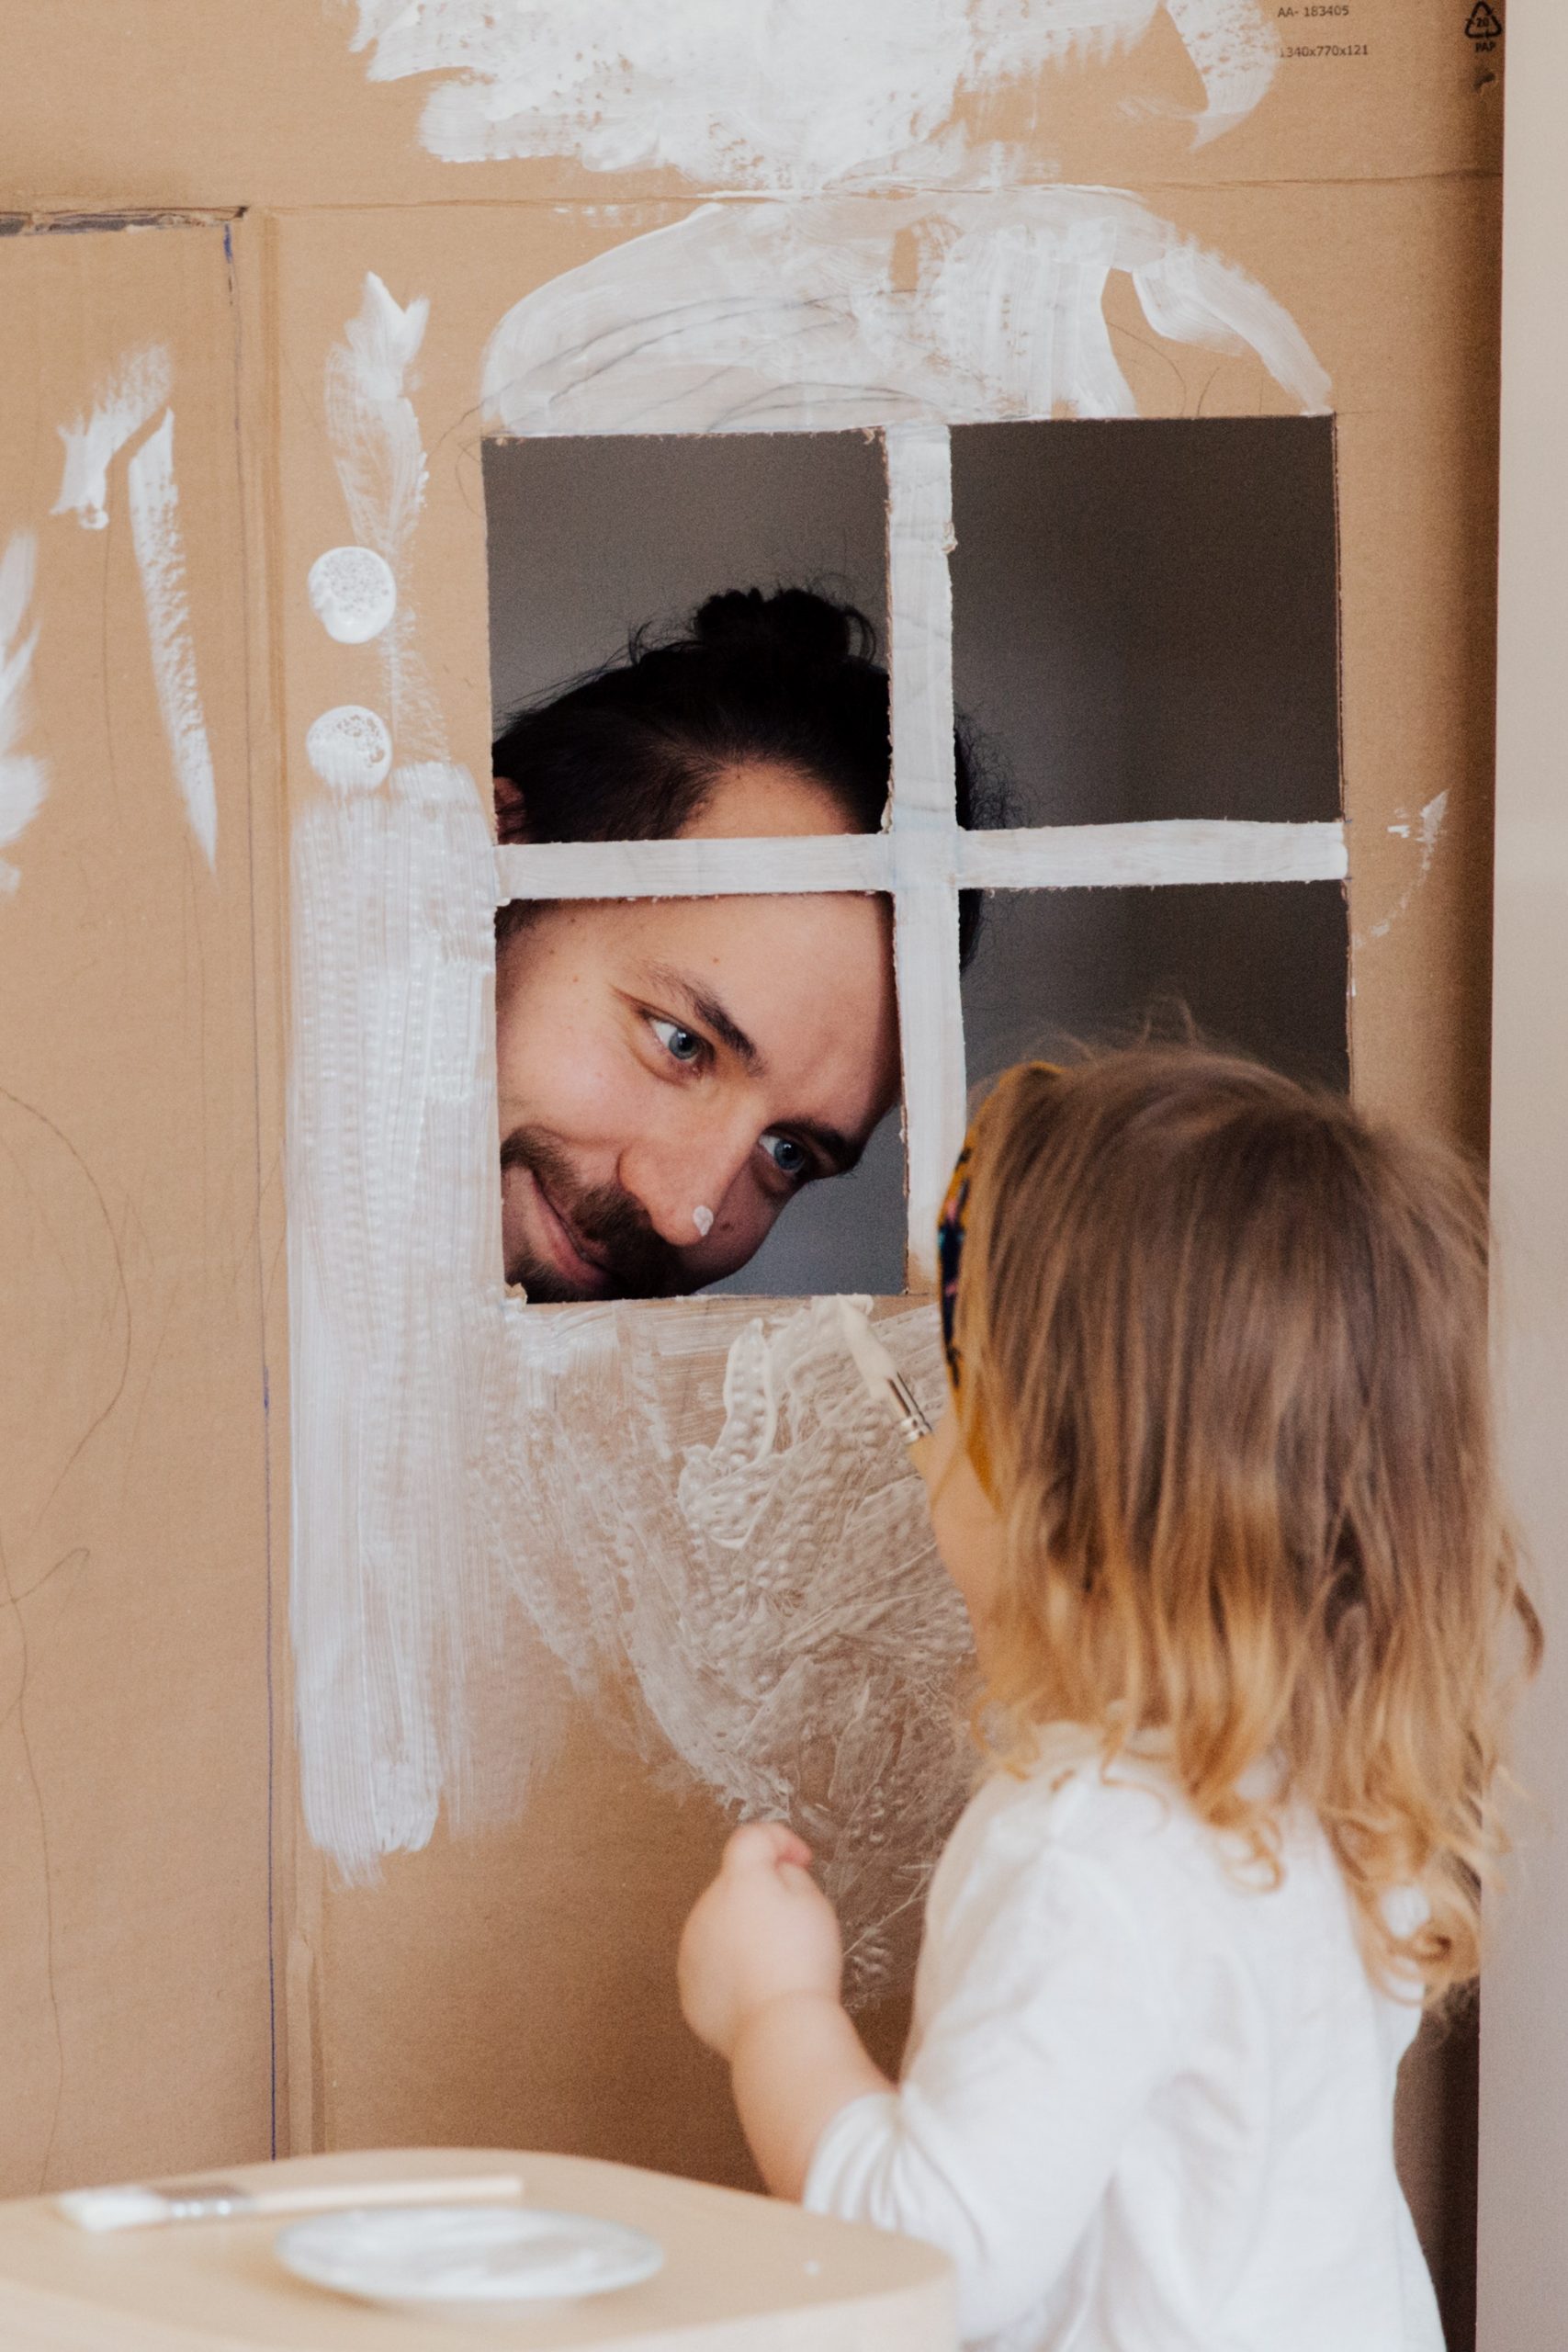 Father in cardboard playhouse with daughter, white paint.